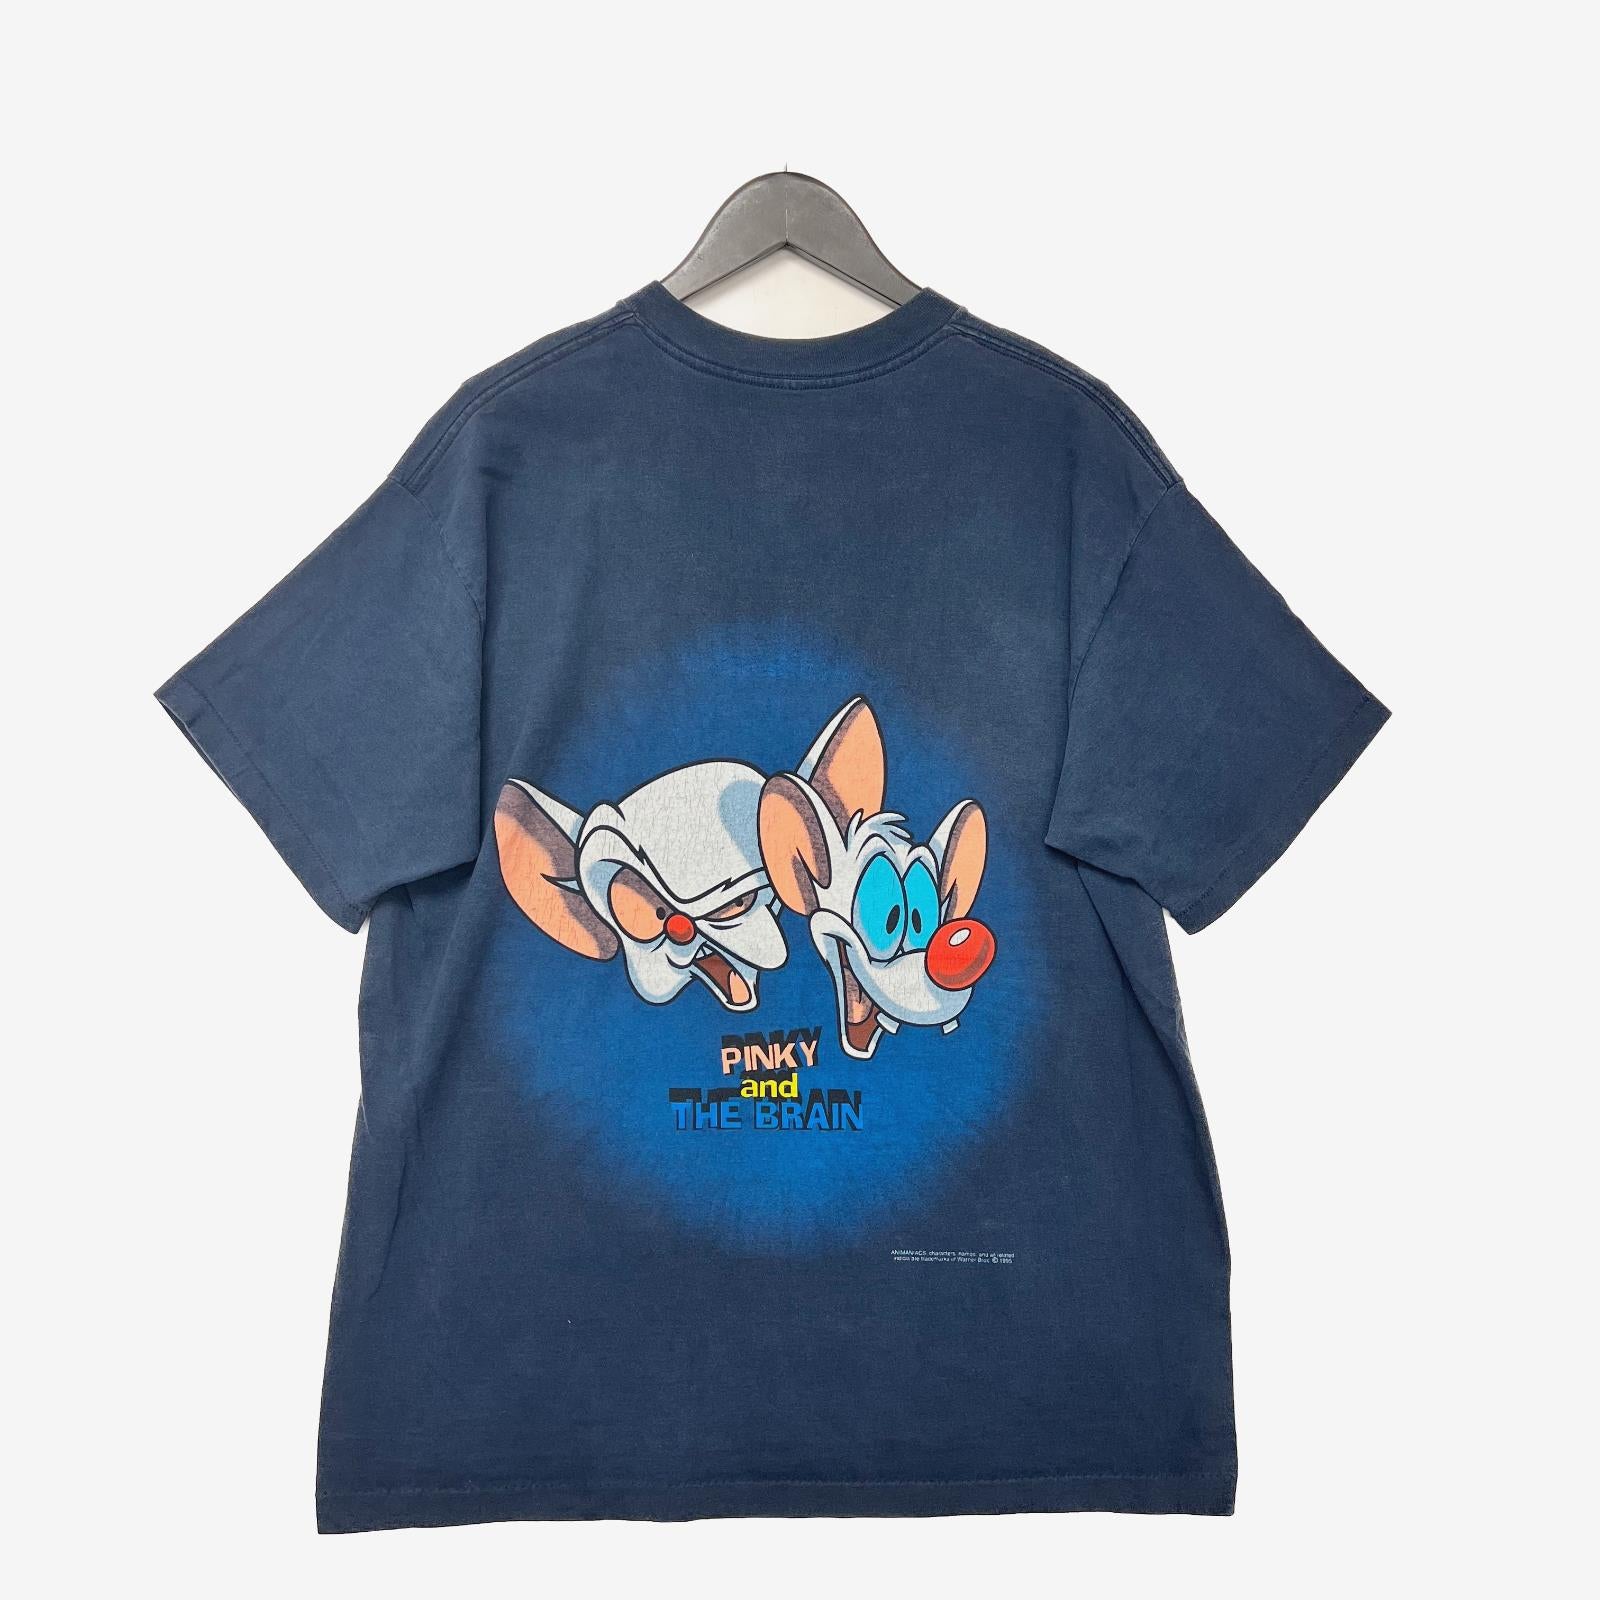 Vintage Pinky and the Brains  T-shirt Size L 1995 Graphic Cartoons Single Stitch